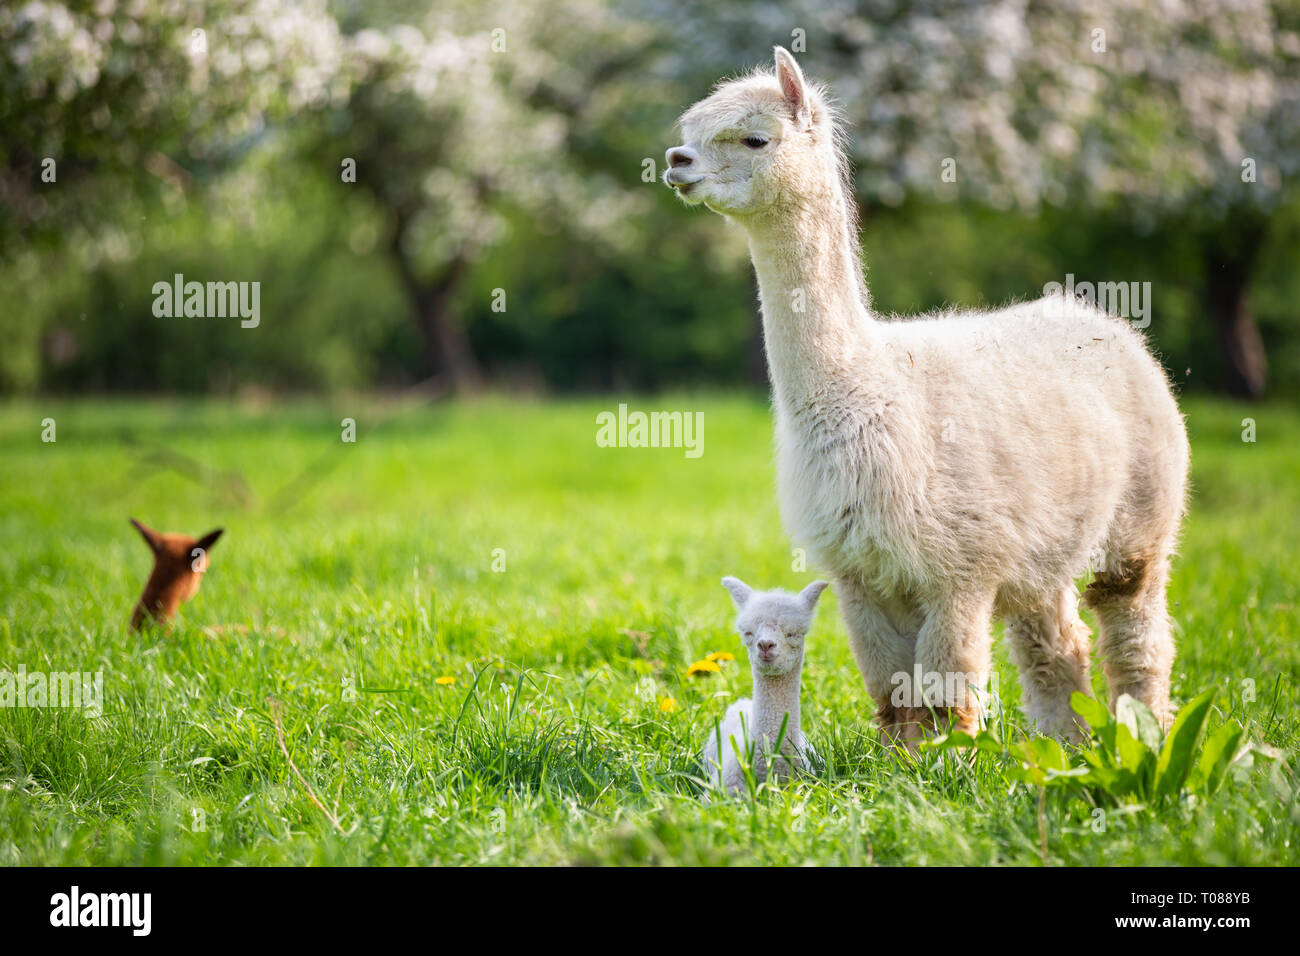 White Alpaca with offspring, South American mammal Stock Photo